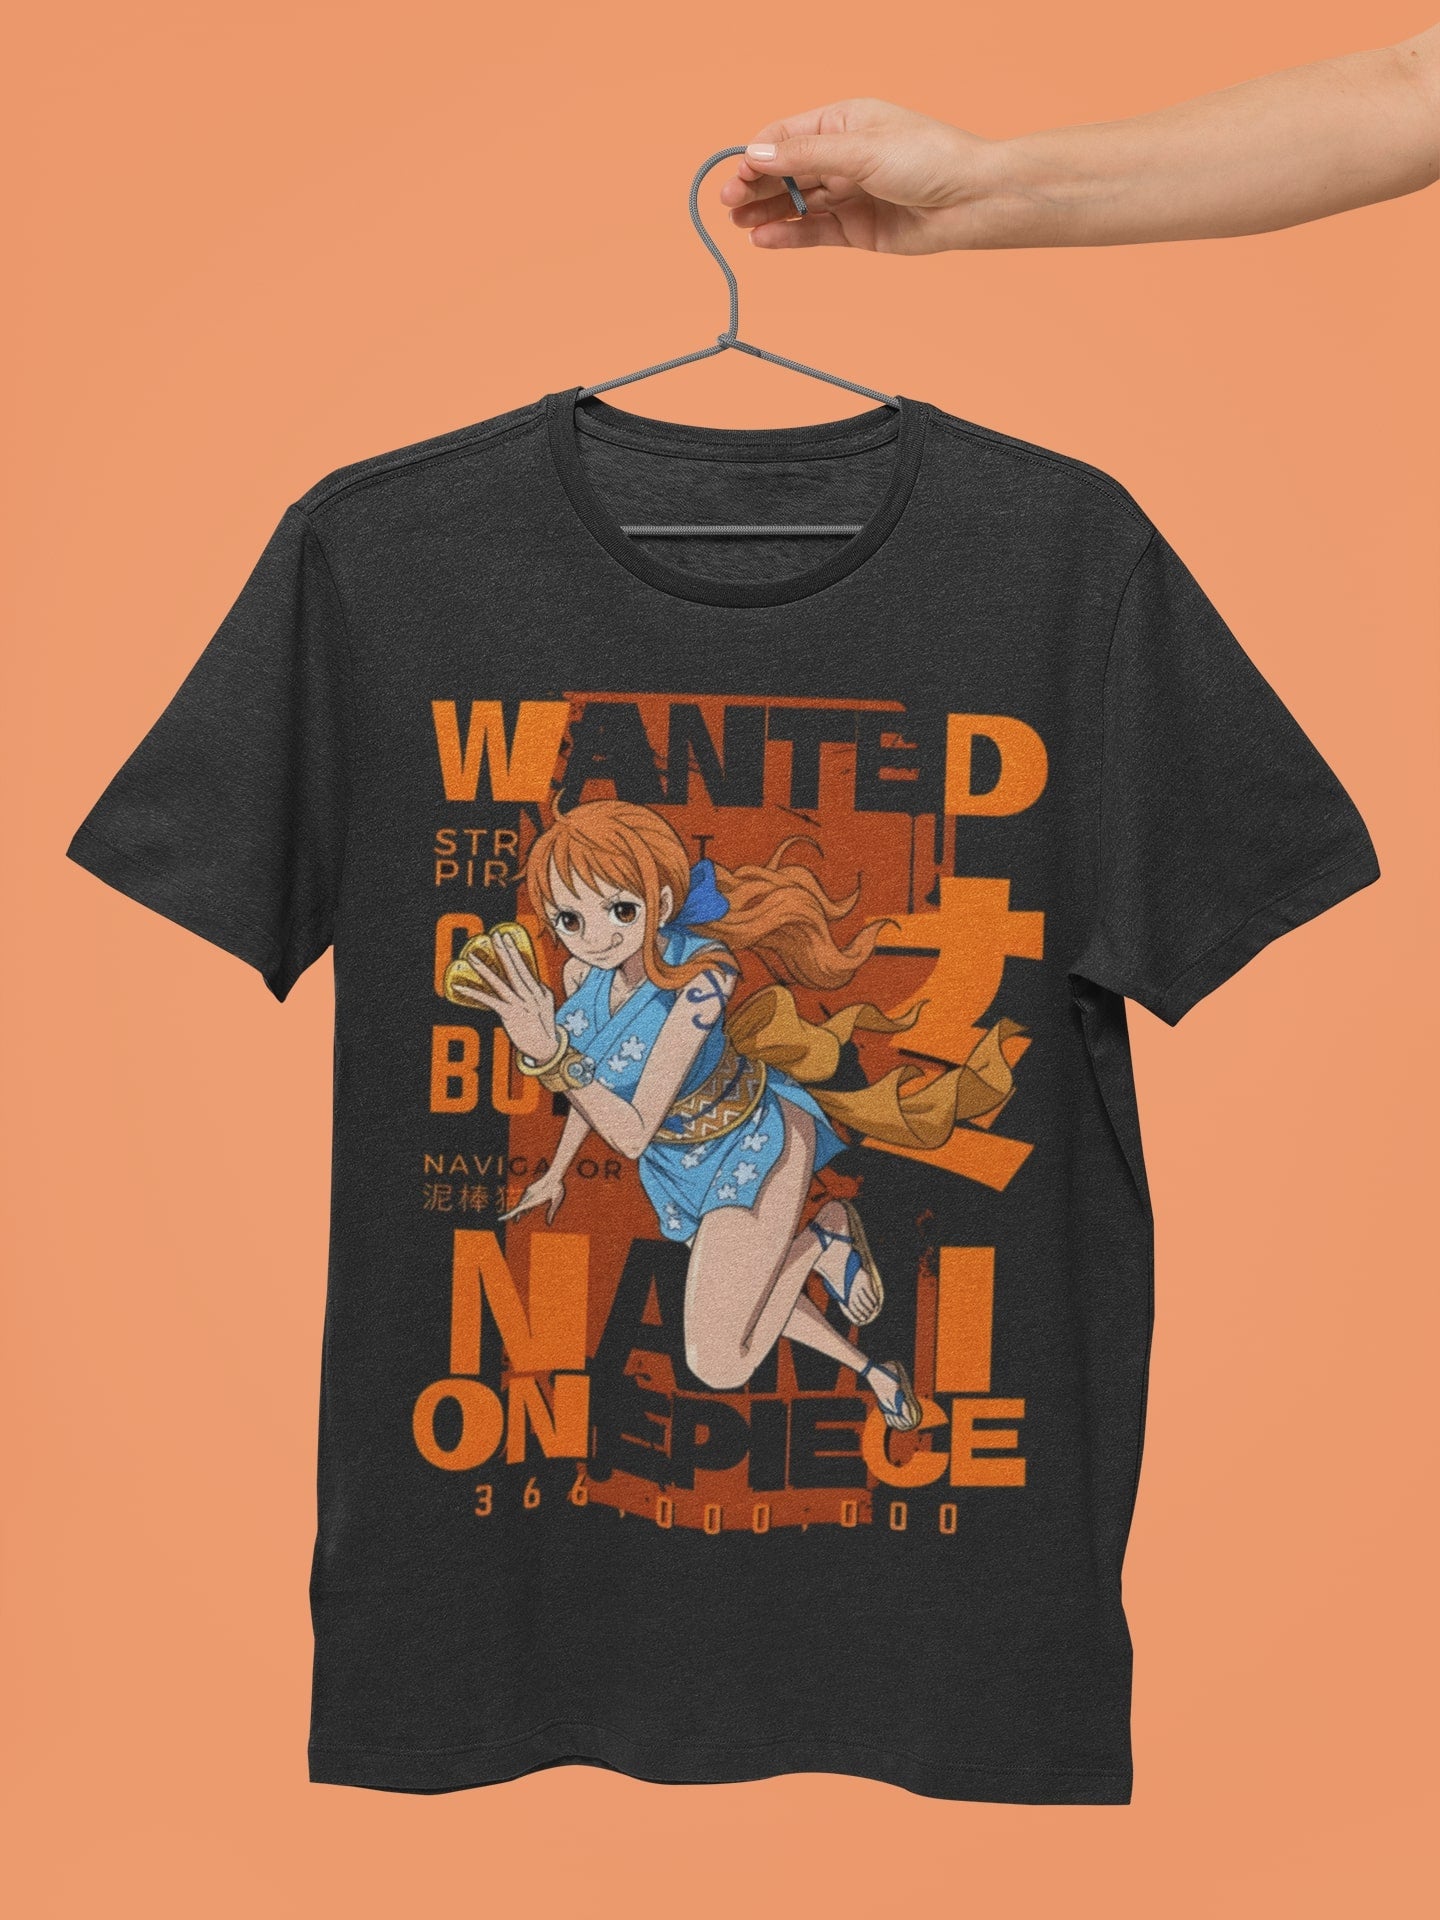 Nami One Piece - Exclusive Limited Edition Wanted Tshirt | Unisex Anime Streetwear